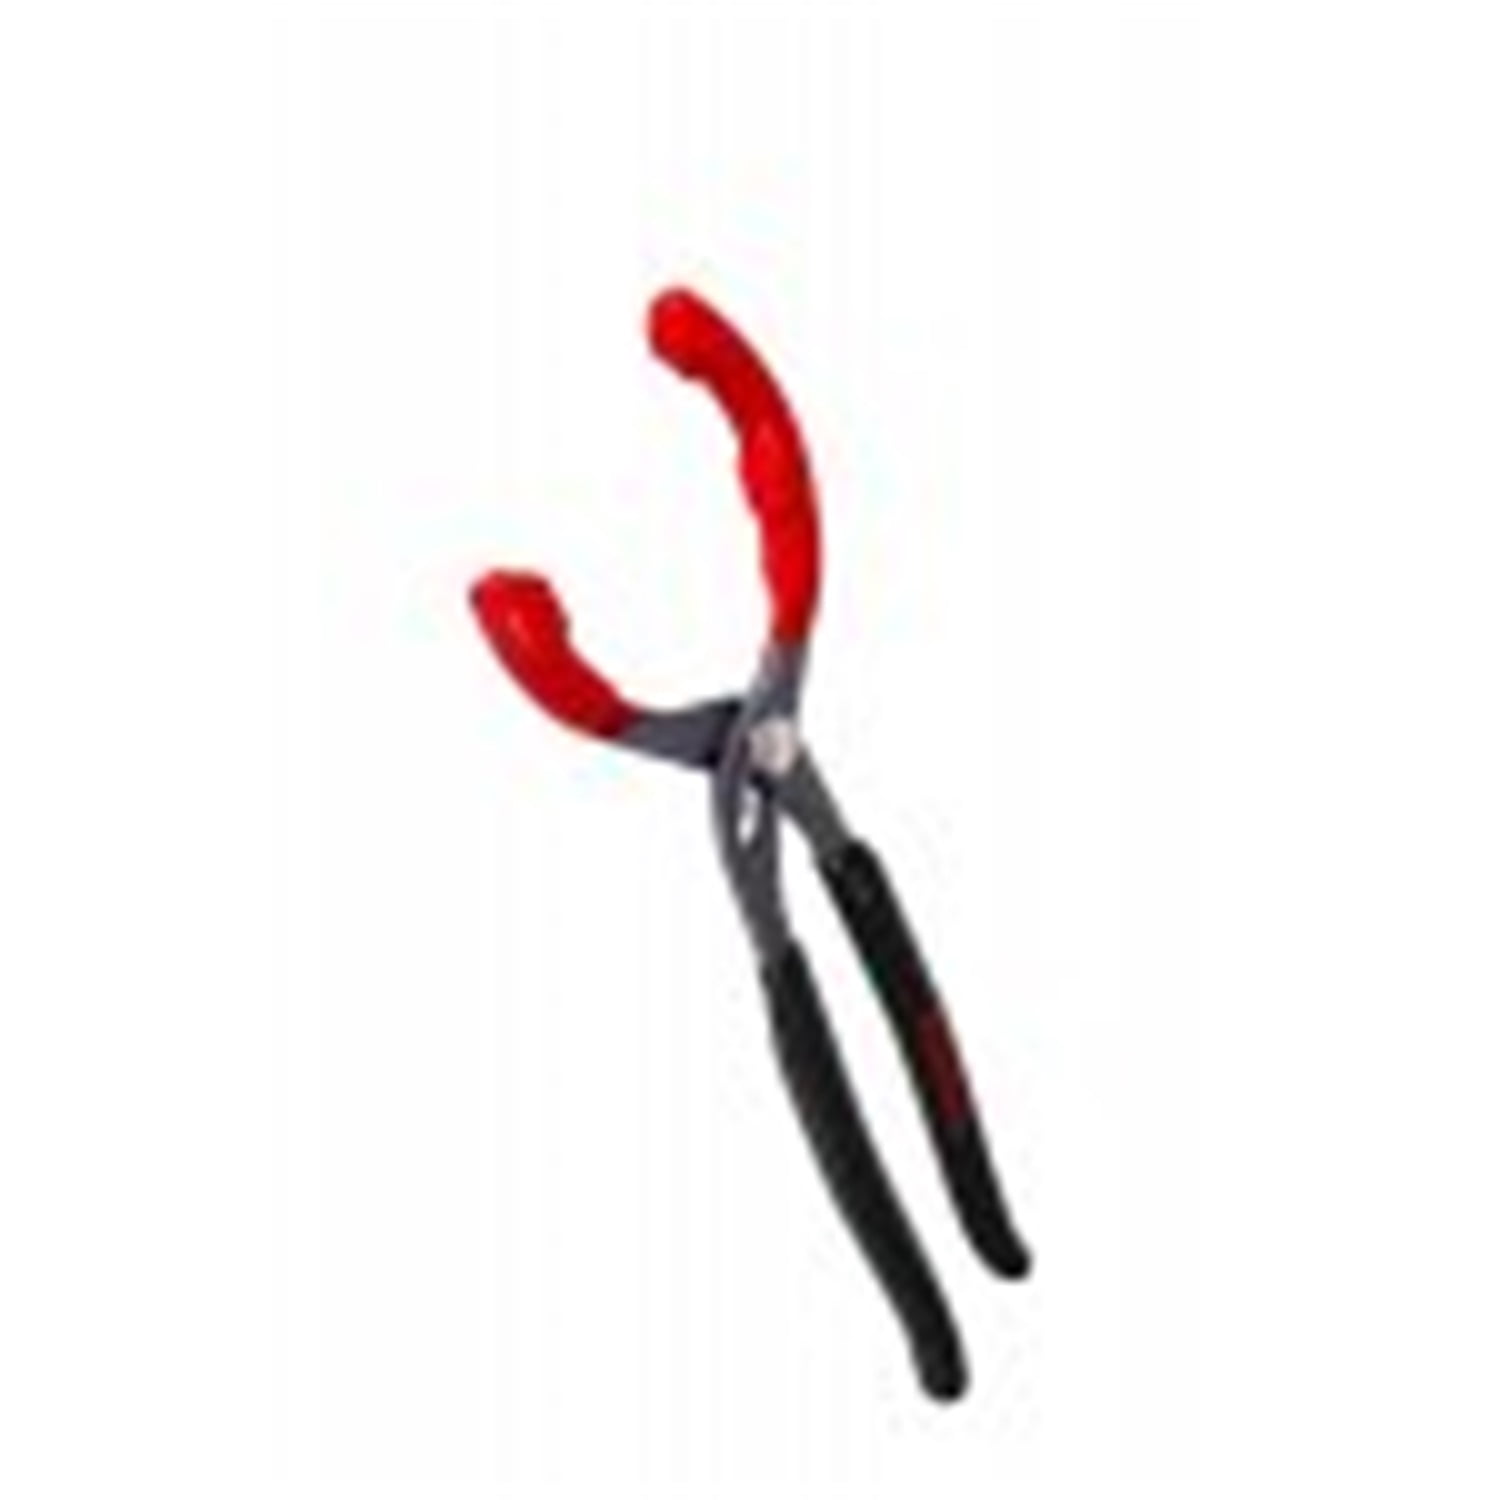 OIL FILTER PLIERS 62MM-110MM IXIF-101